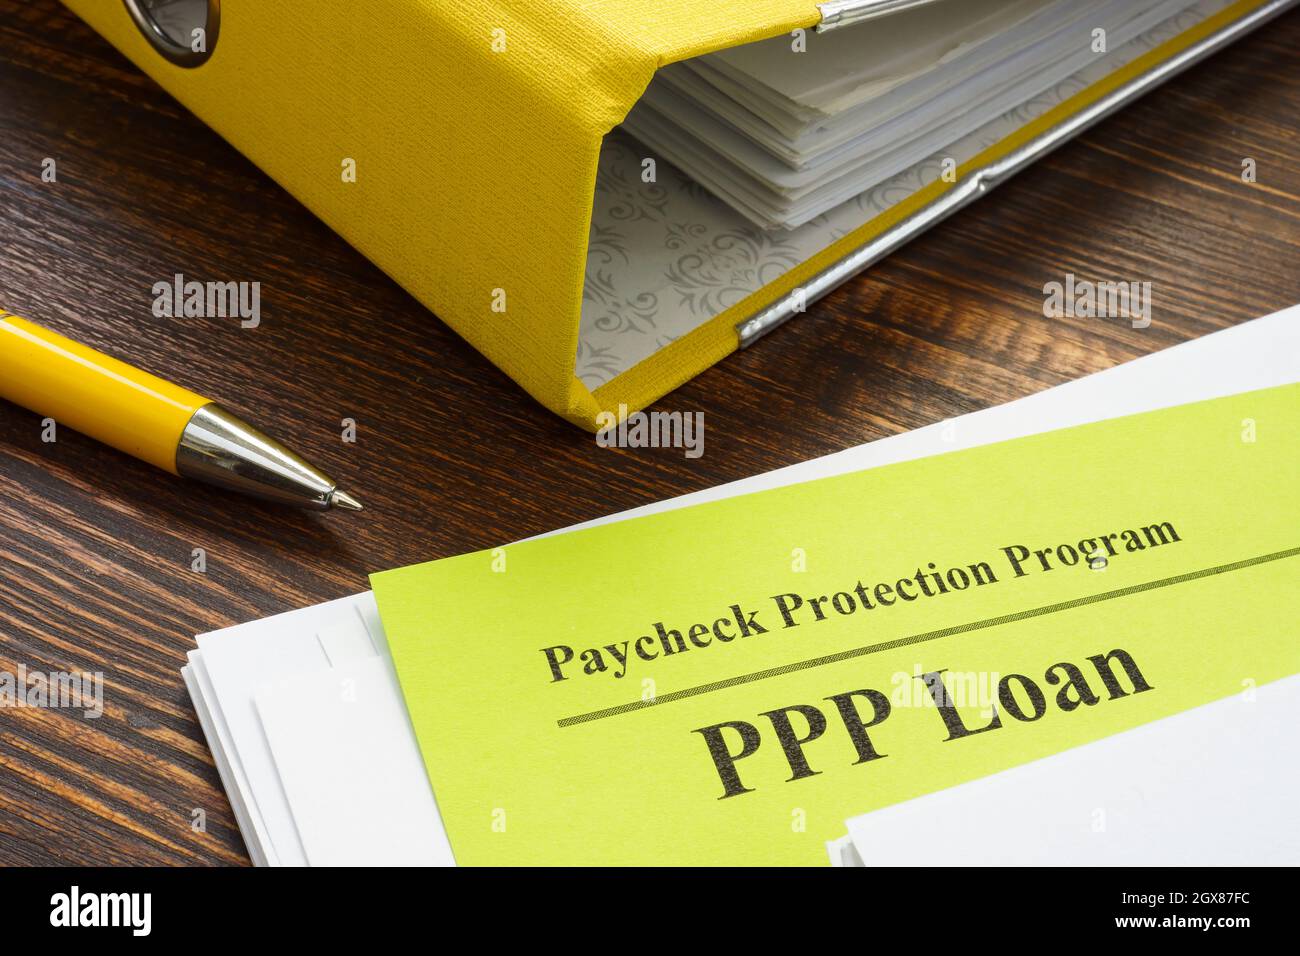 Paycheck Protection Program or PPP loan papers and yellow folder. Stock Photo